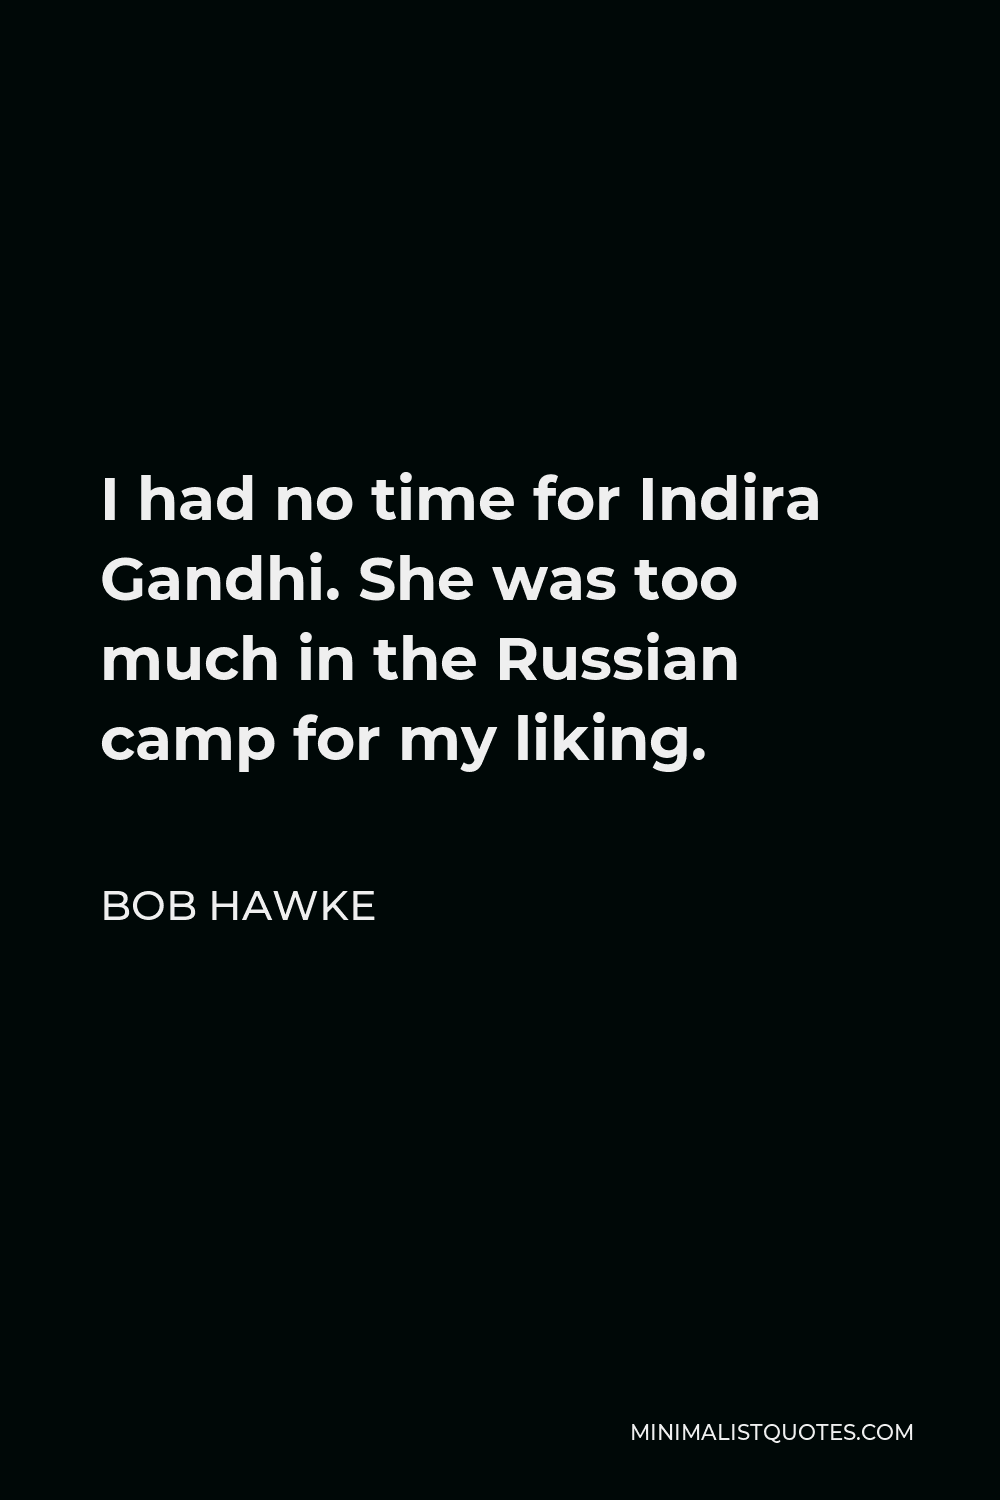 Bob Hawke Quote - I had no time for Indira Gandhi. She was too much in the Russian camp for my liking.